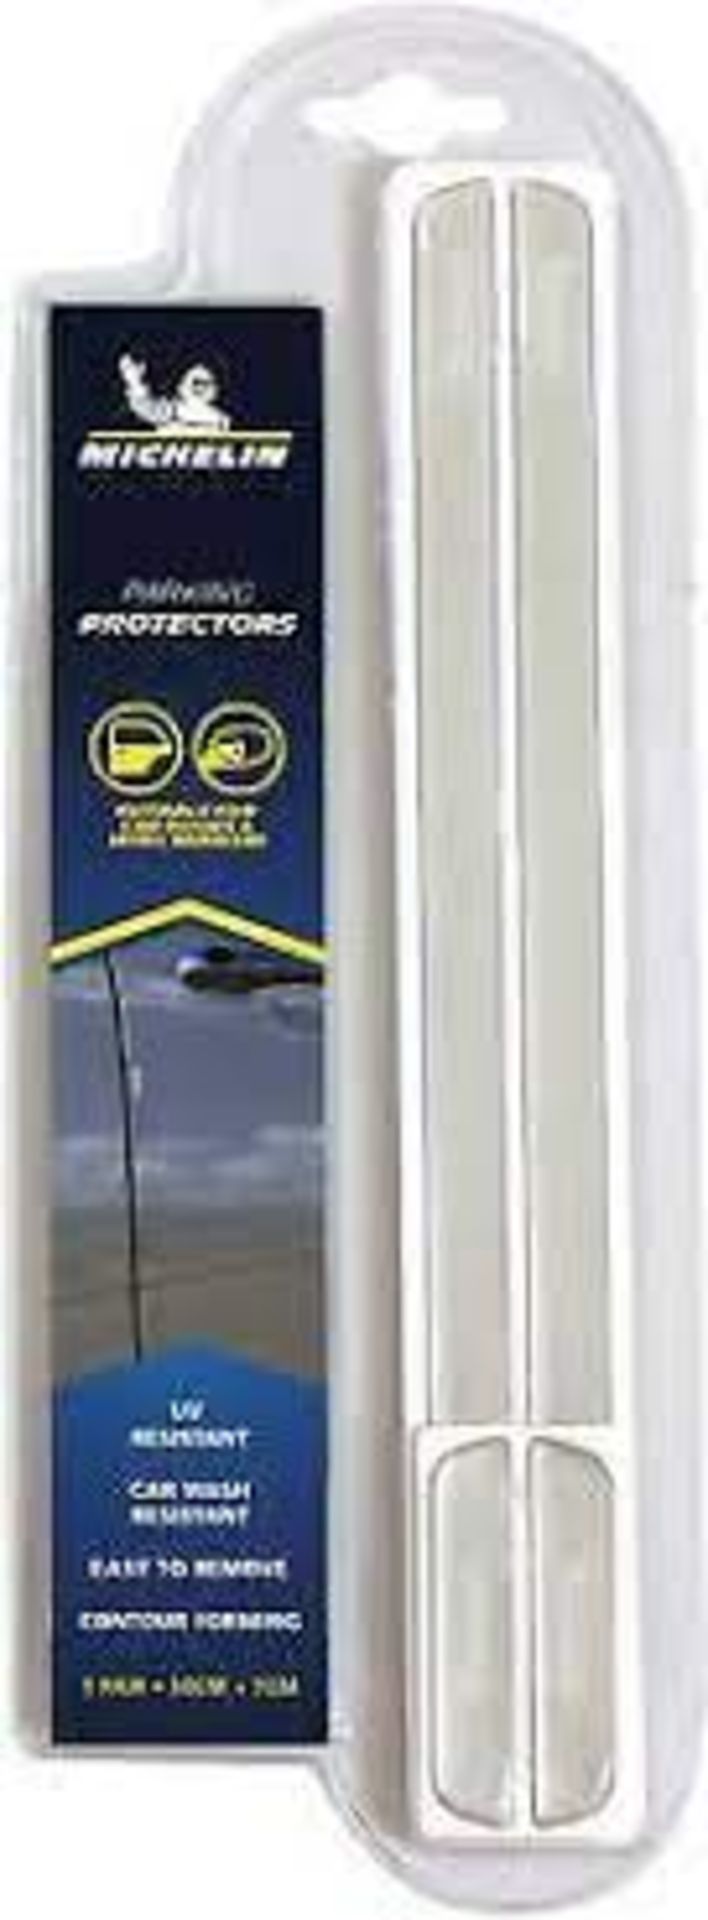 40 X NEW PACKAGED SETS OF Michelin Parking Protectors Door and Wing Mirror Reflective. RRP £8.99